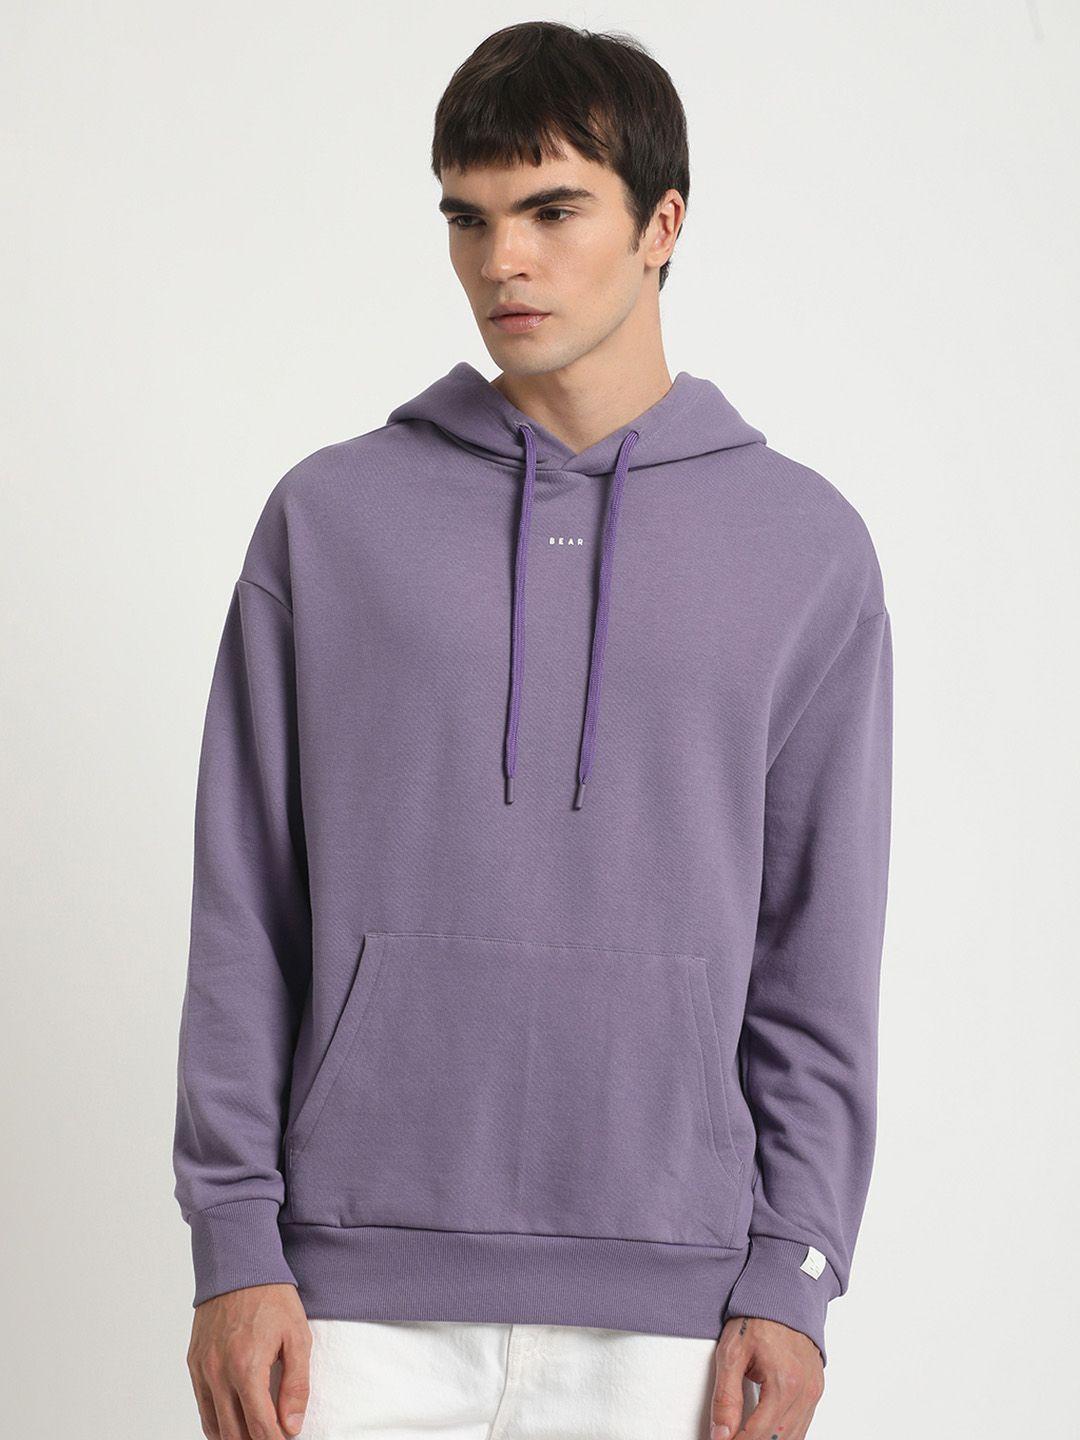 the bear house hooded pure cotton pullover sweatshirt